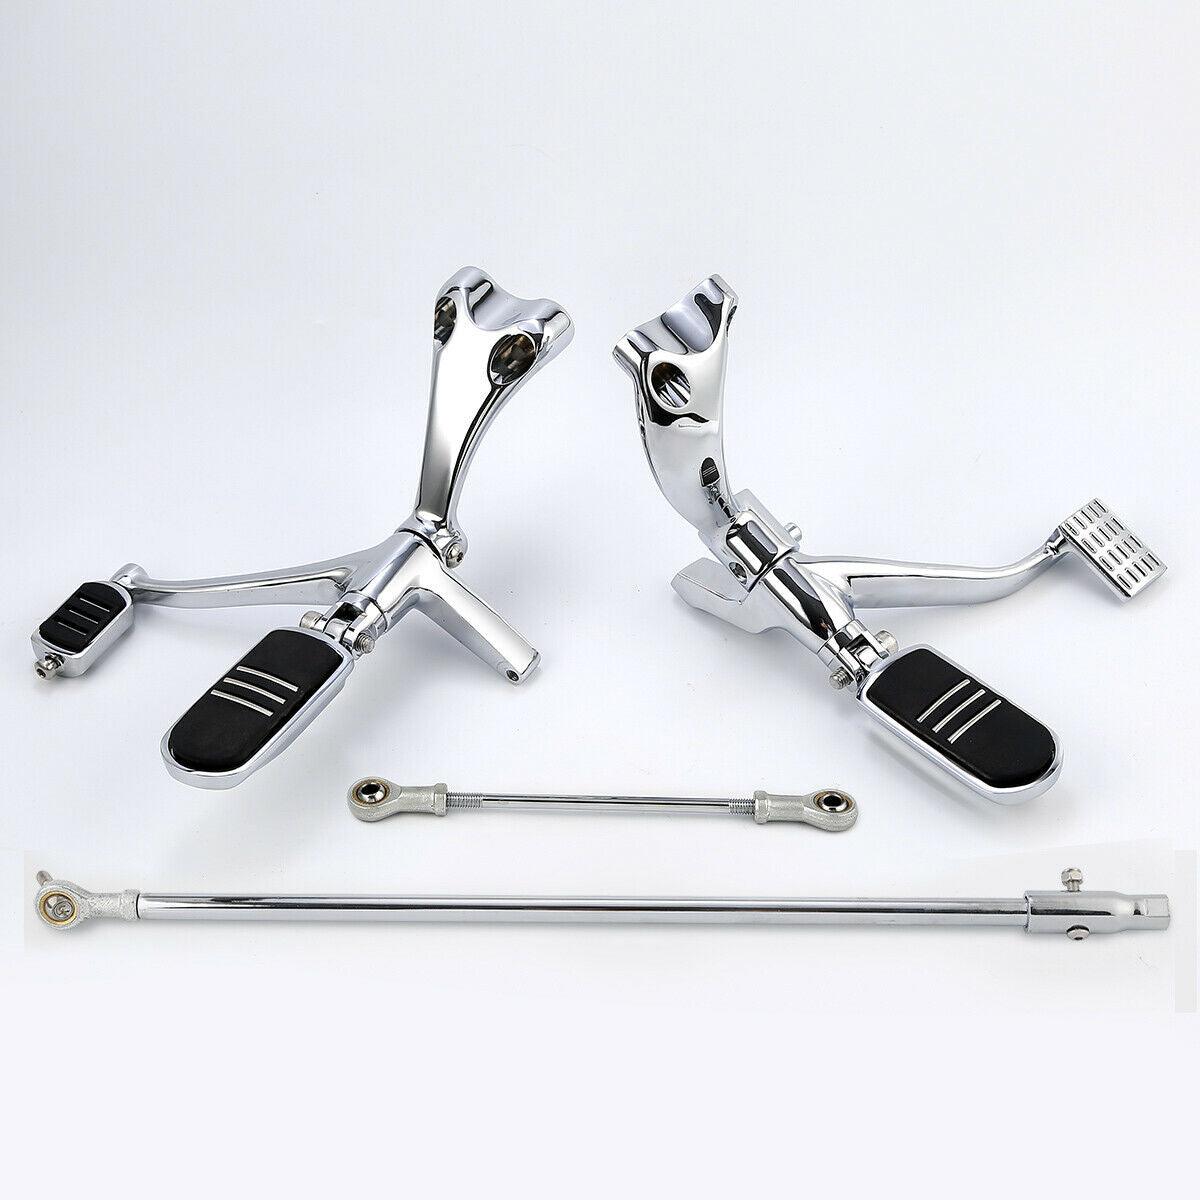 Chrome Forward Control Footpeg Bracket Fit For Harley Sportster 883 1200 14-2021 - Moto Life Products